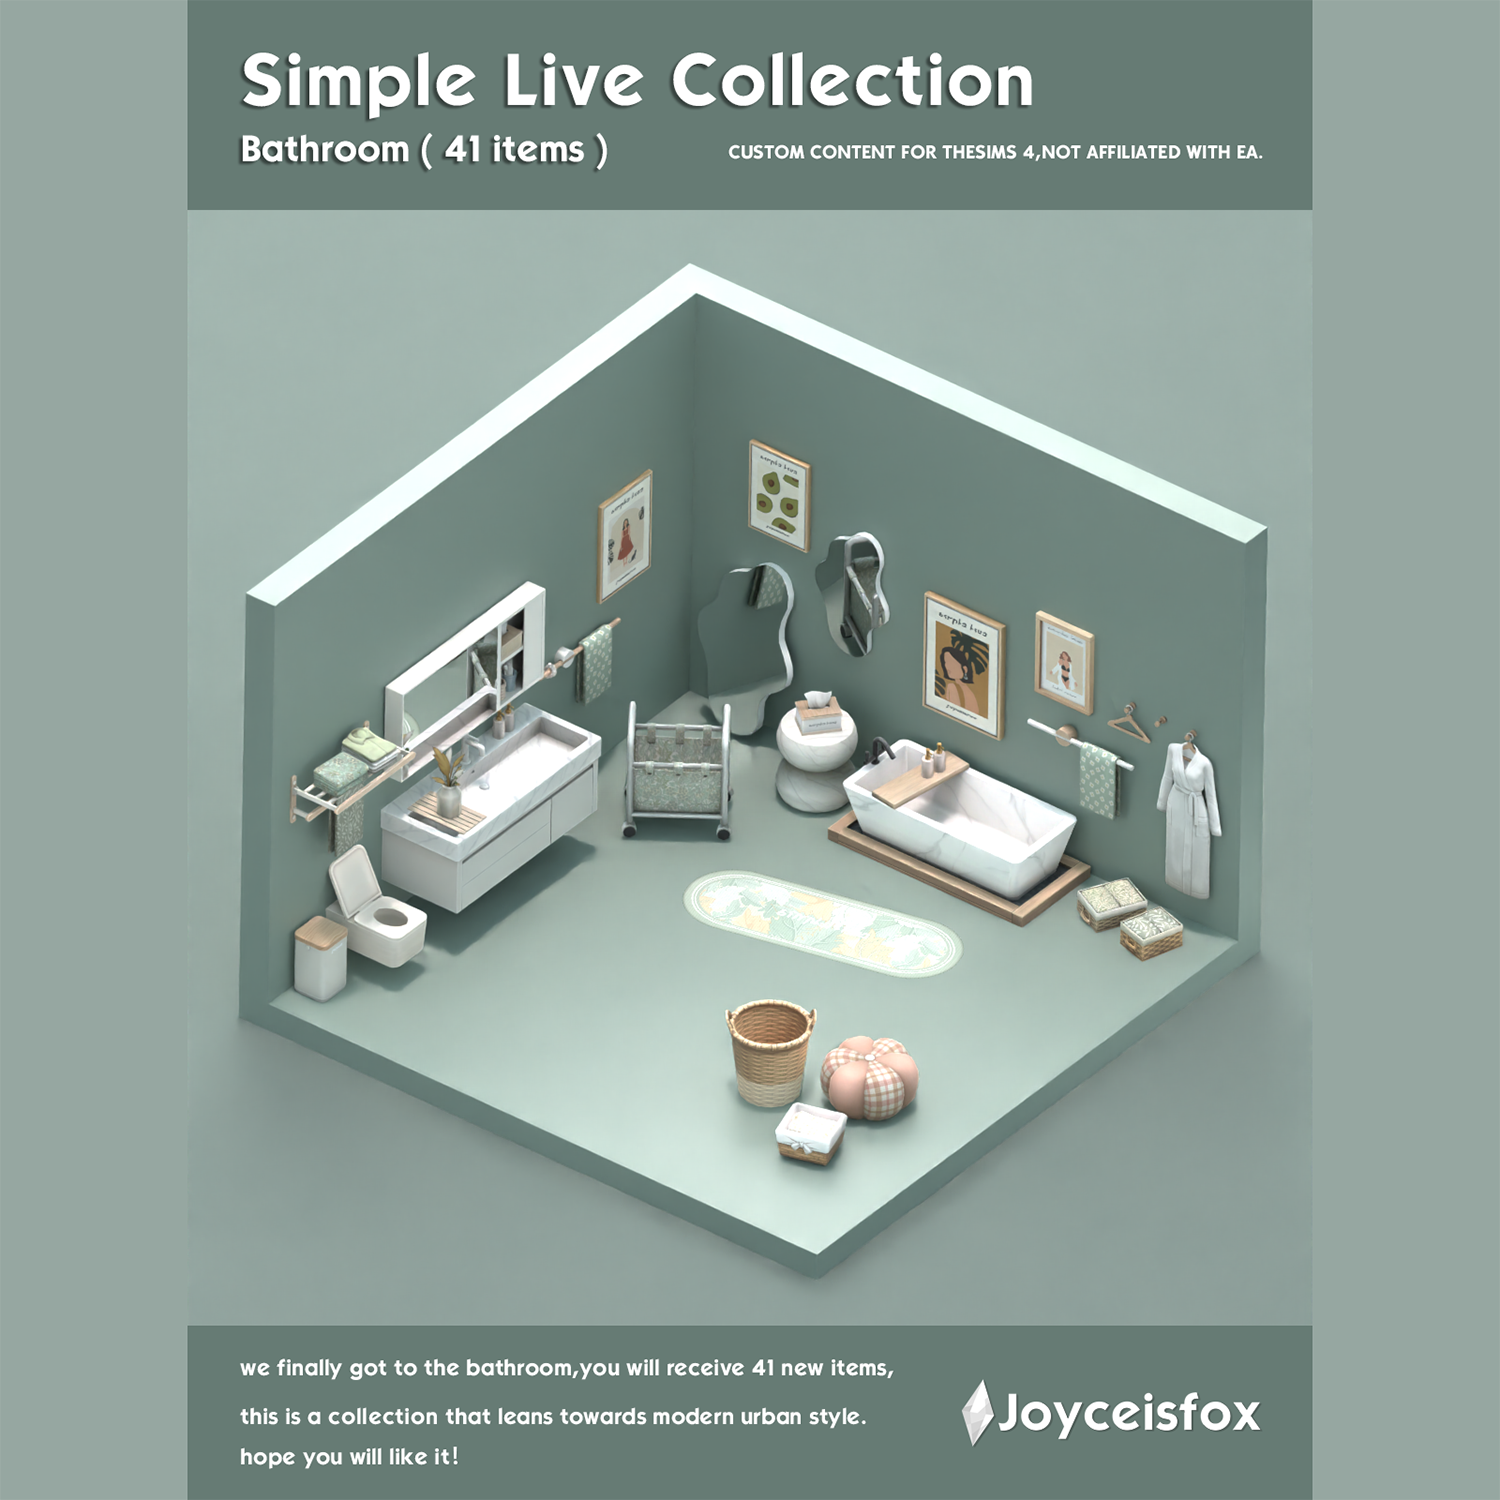 Simple Live Collection #5 project avatar